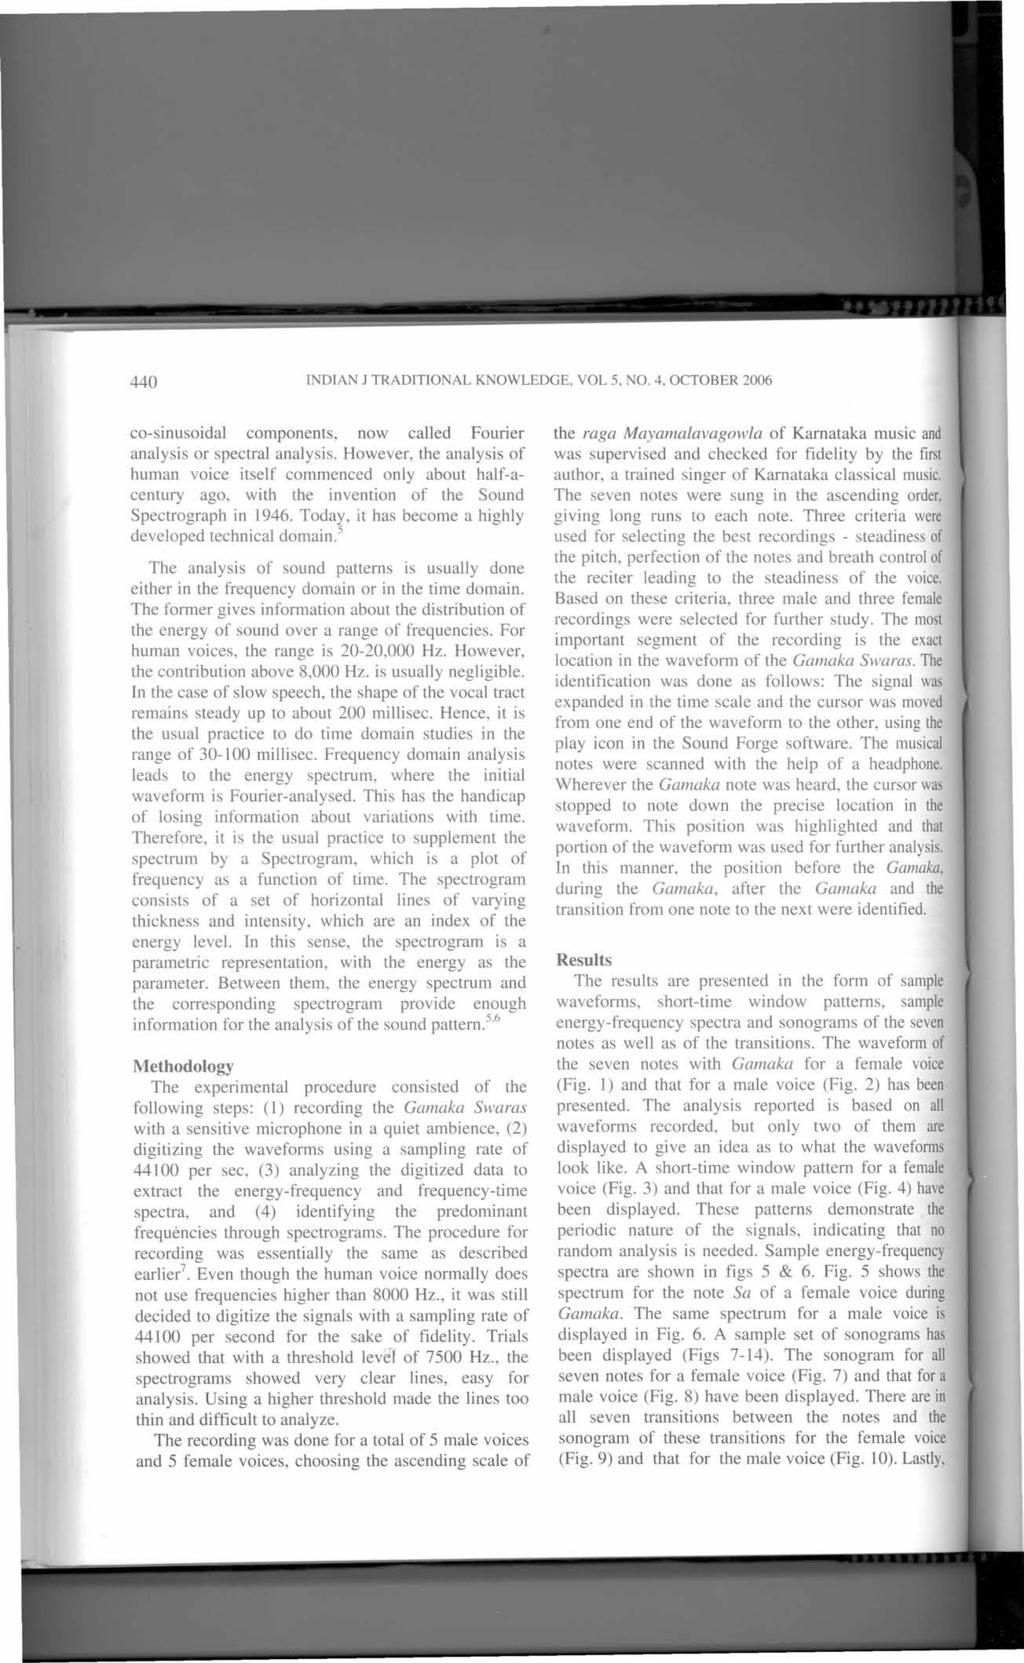 440 NDAN J TRADTONAL KNOWLEDGE, VOL 5, NO.4, OCTOBER 2006 co-sinusoidal components, now called Fourier analysis or spectral analysis.